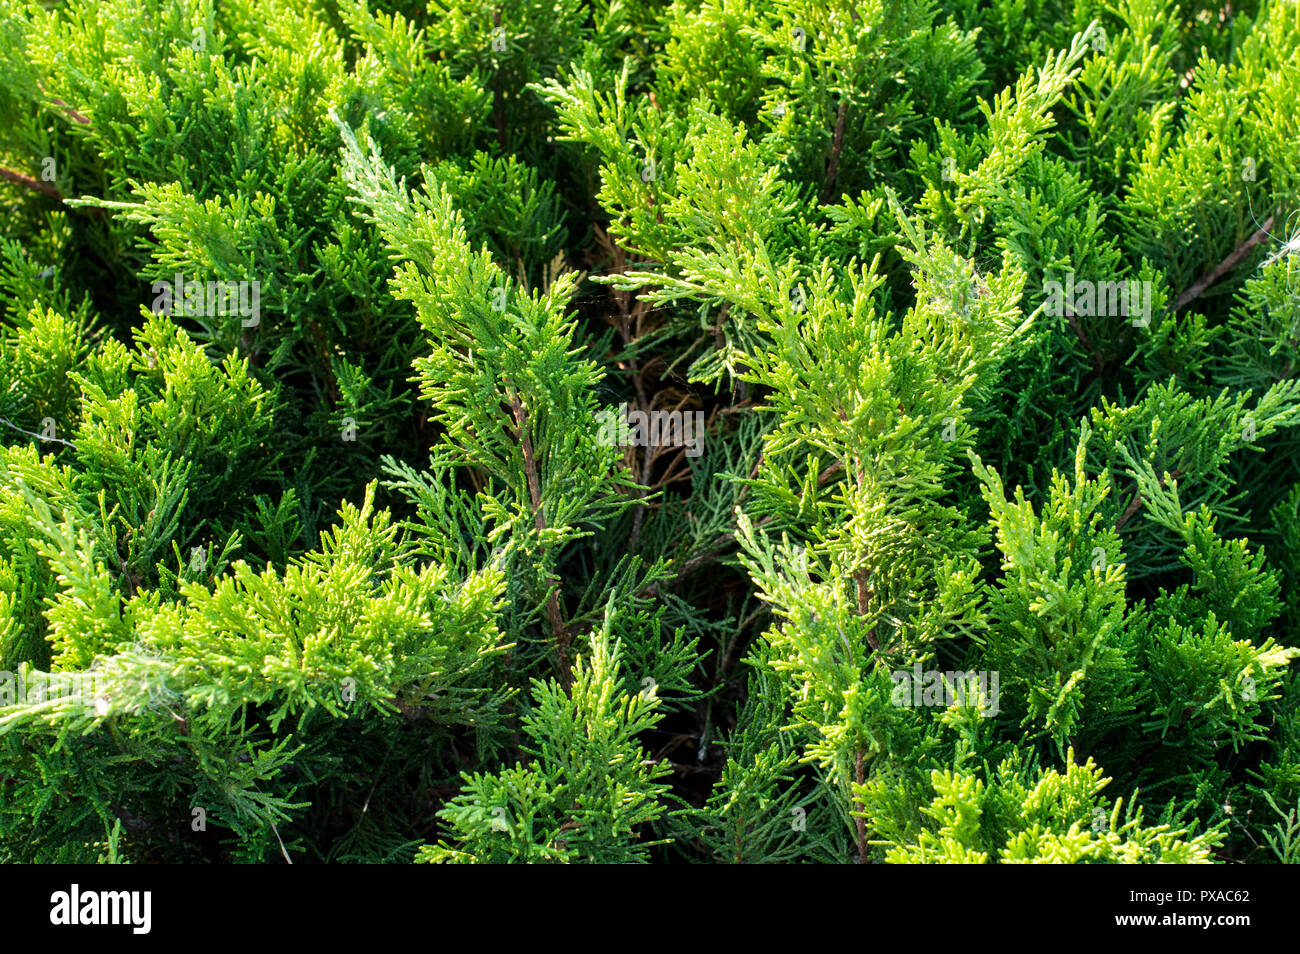 Thuja, Thujia is the genus of the gymnosperm conifers of the family Cypressaceae. Stock Photo